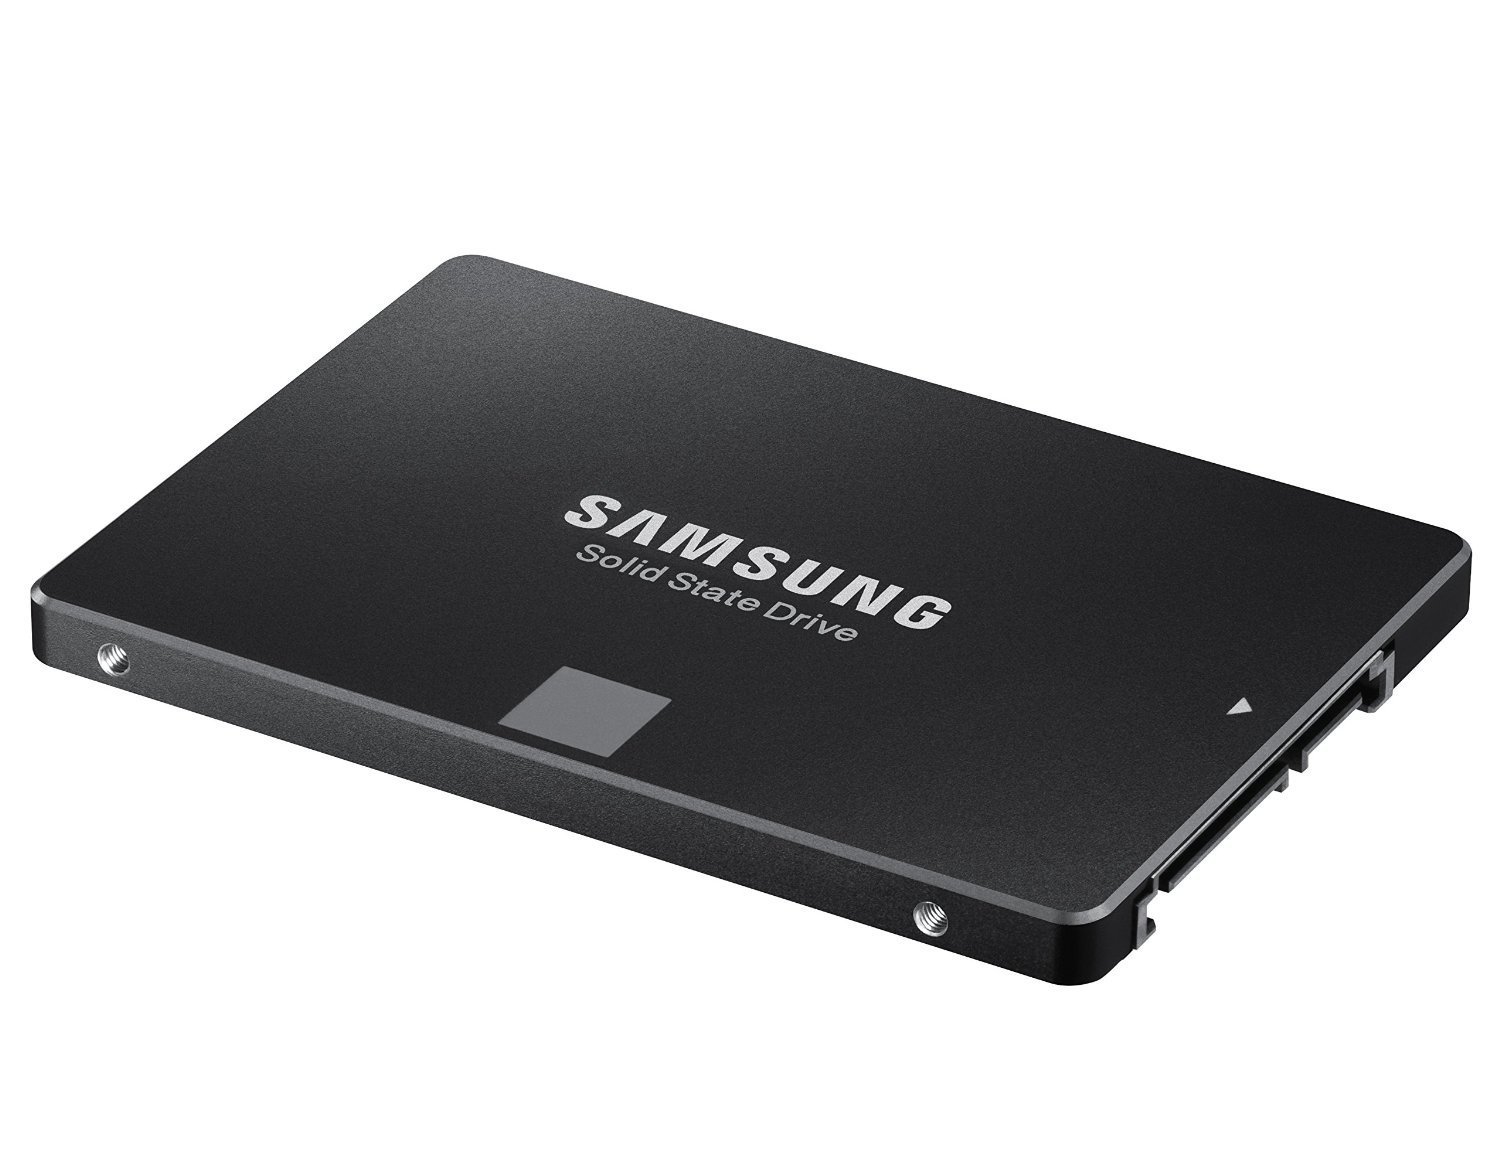 Samsung Launches Monster 4TB 850 EVO SSD Priced at $1,499